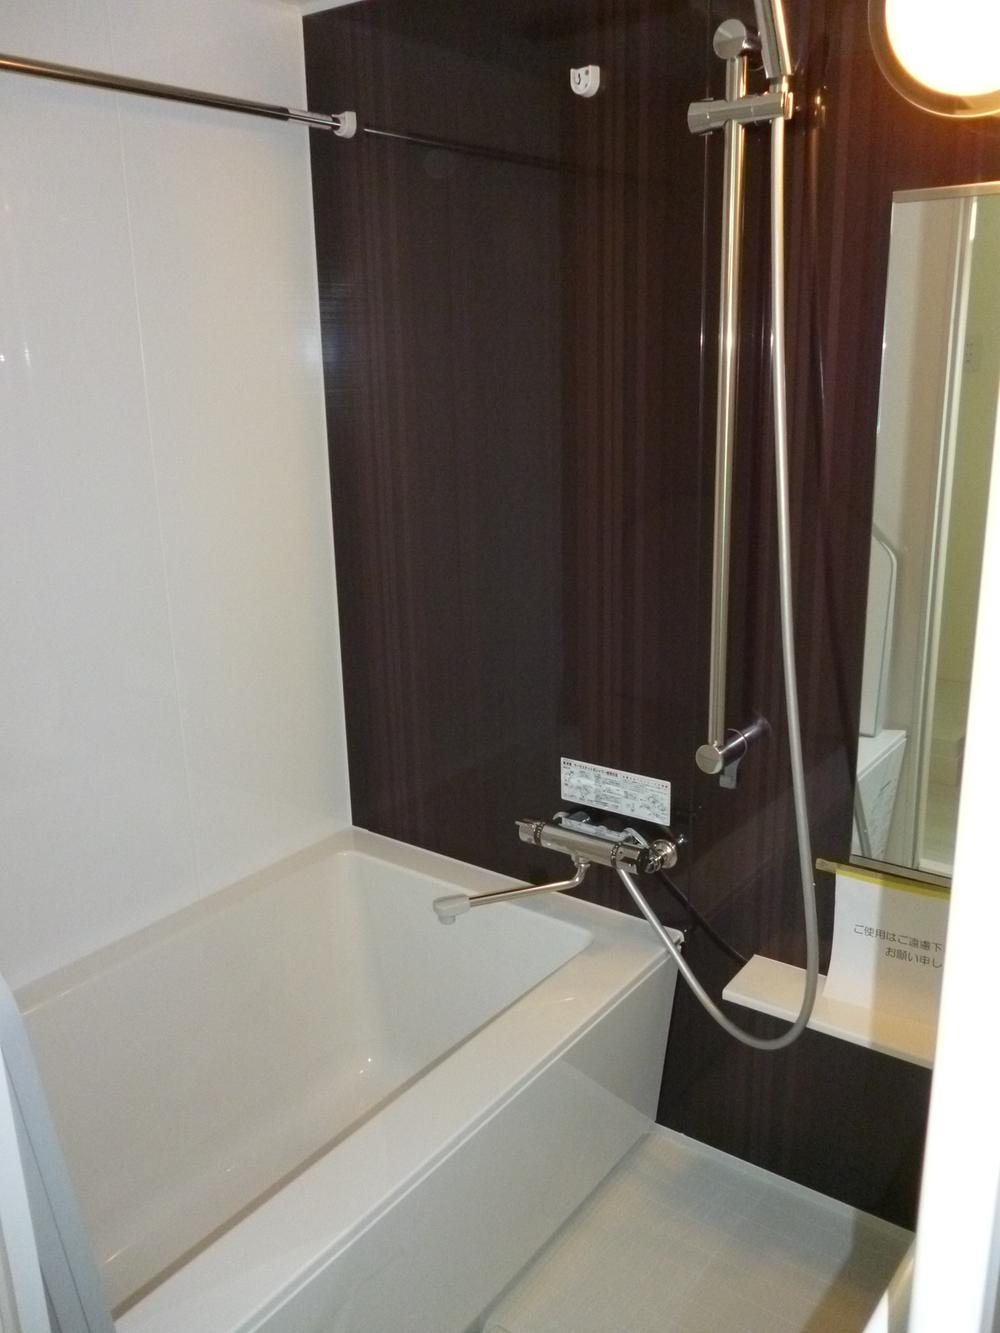 Bathroom. Unit bus with ventilation drying heater